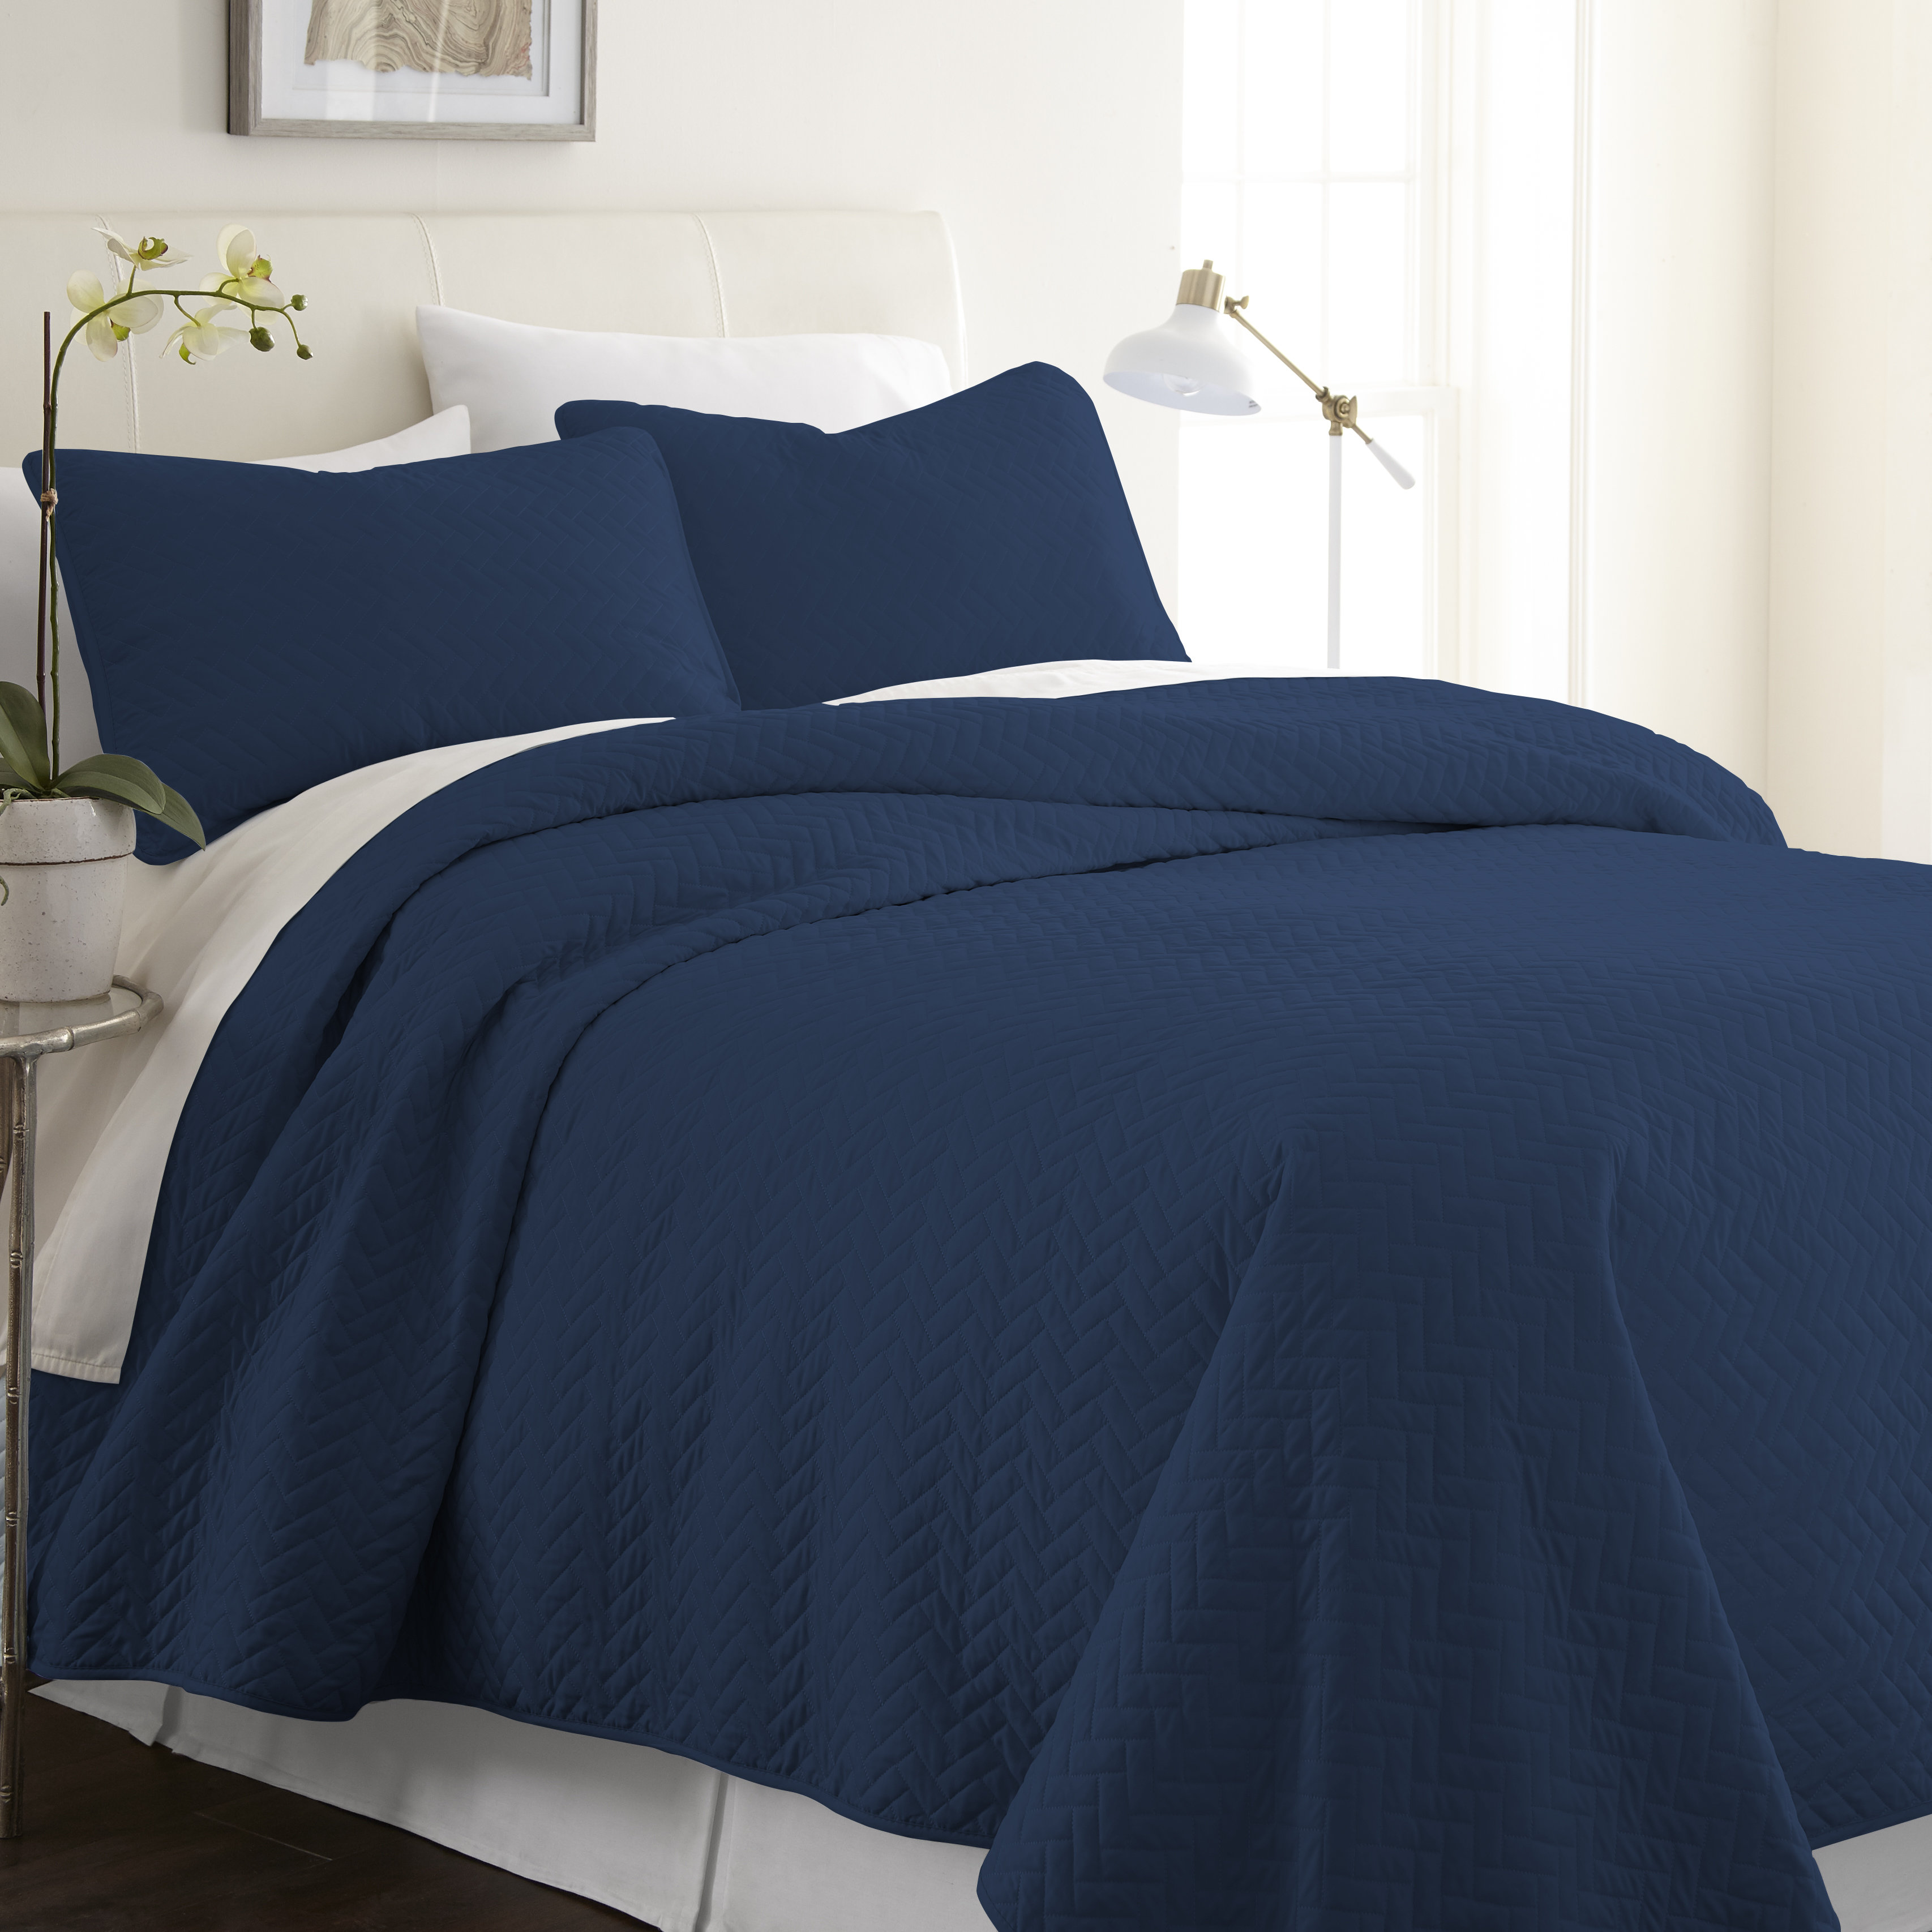 Navy Twin Quilts, Coverlets, \u0026 Sets You 